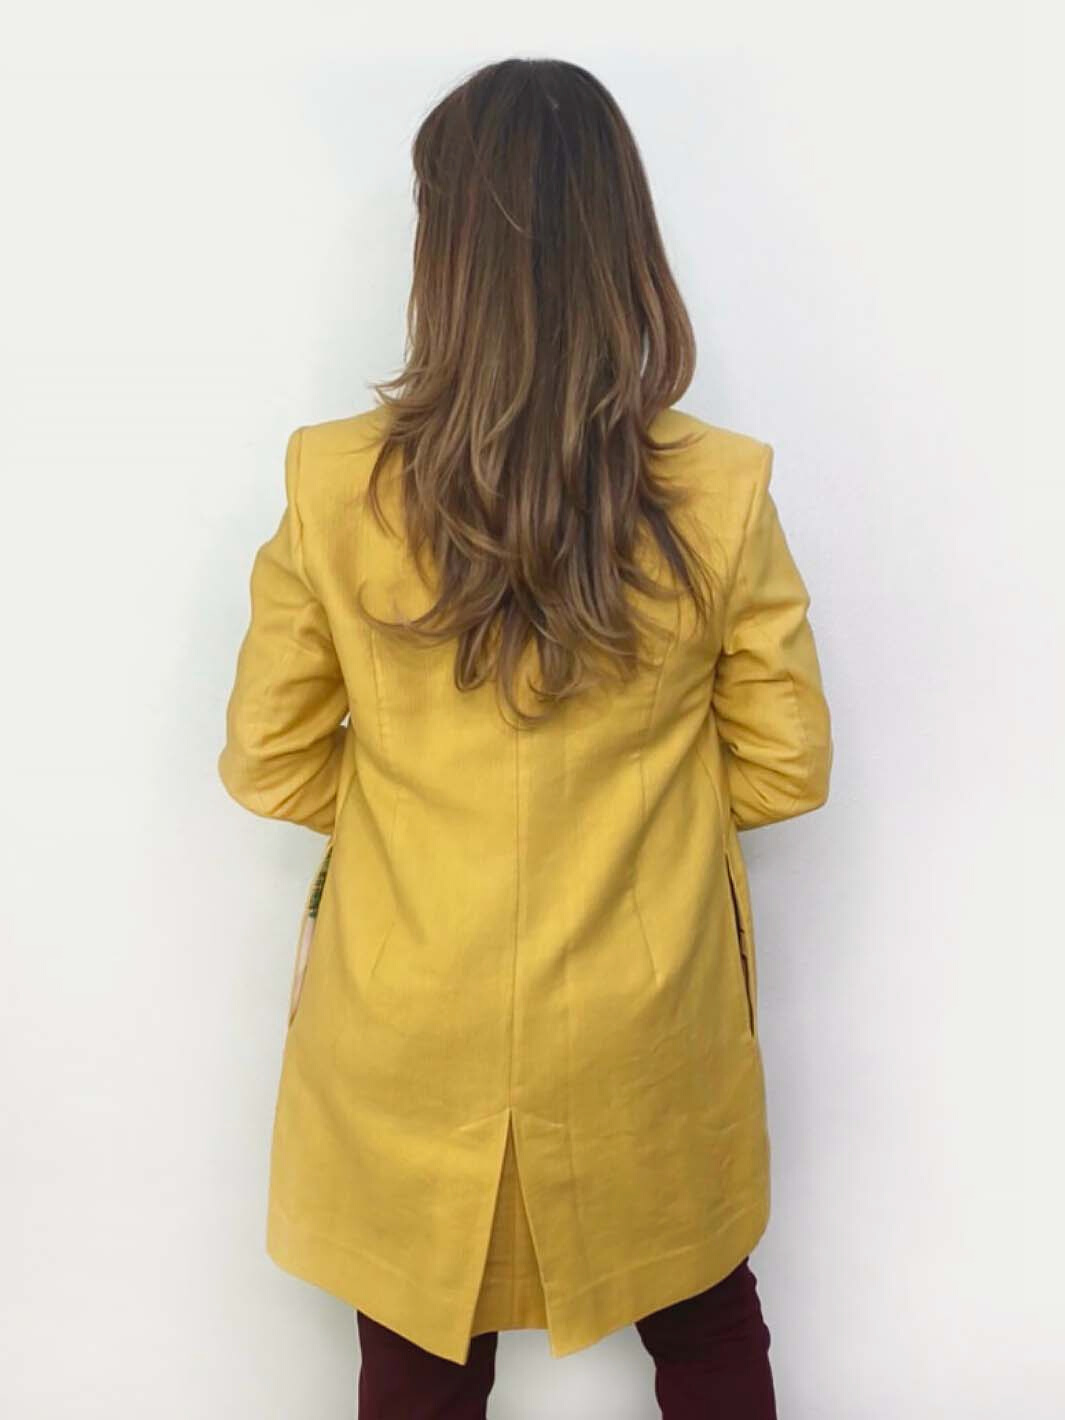 Petite coat with two-piece sleeve, hem just above the knee and a pleat at center back hem for better movement